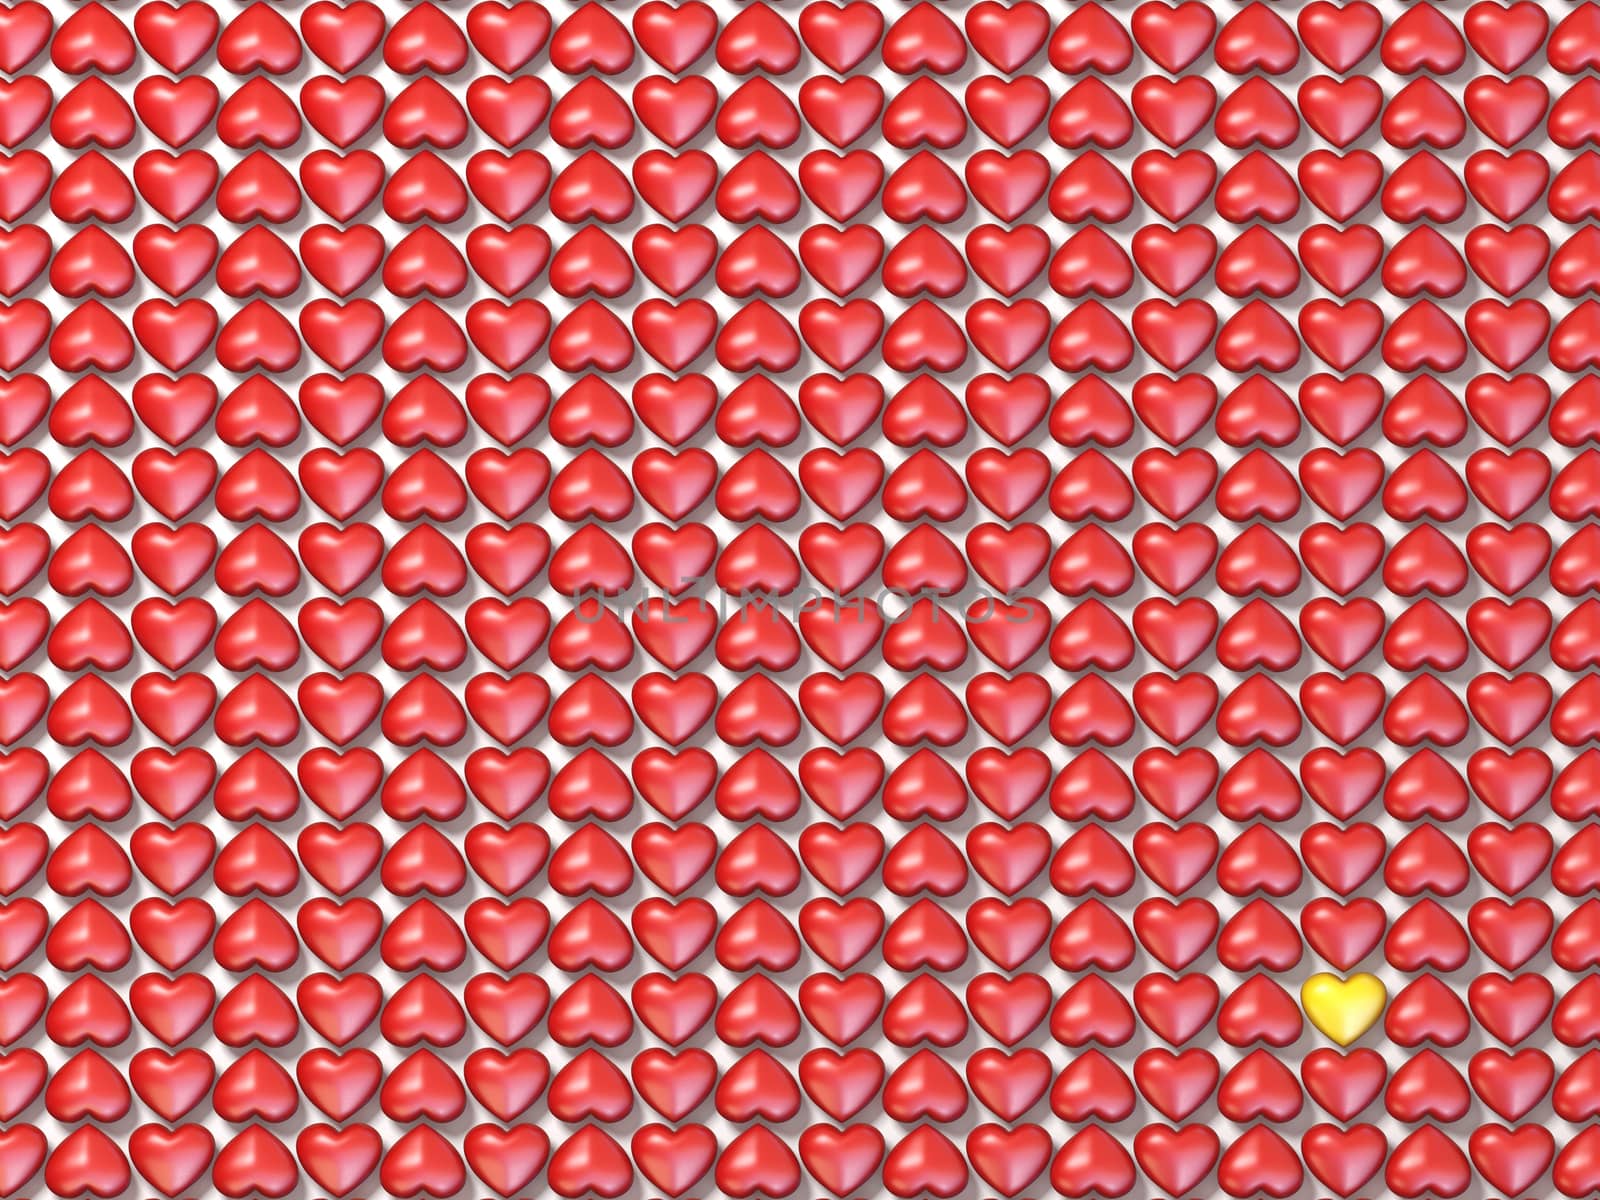 Red hearts field and one yellow heart 3D by djmilic